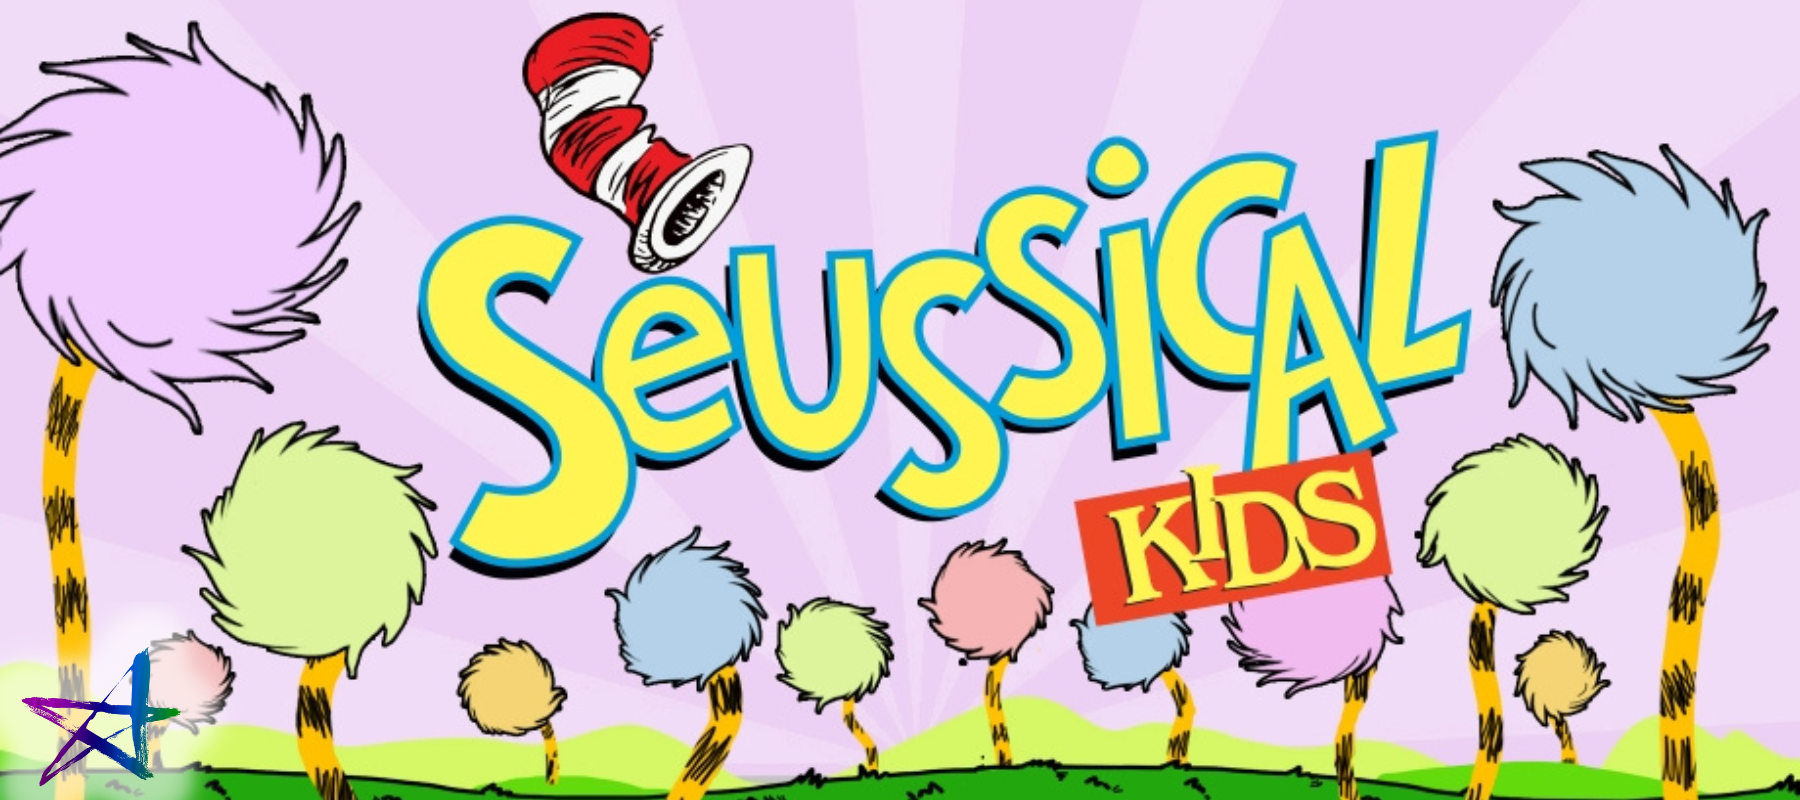 Seussical Website Image (1800 × 800 px)